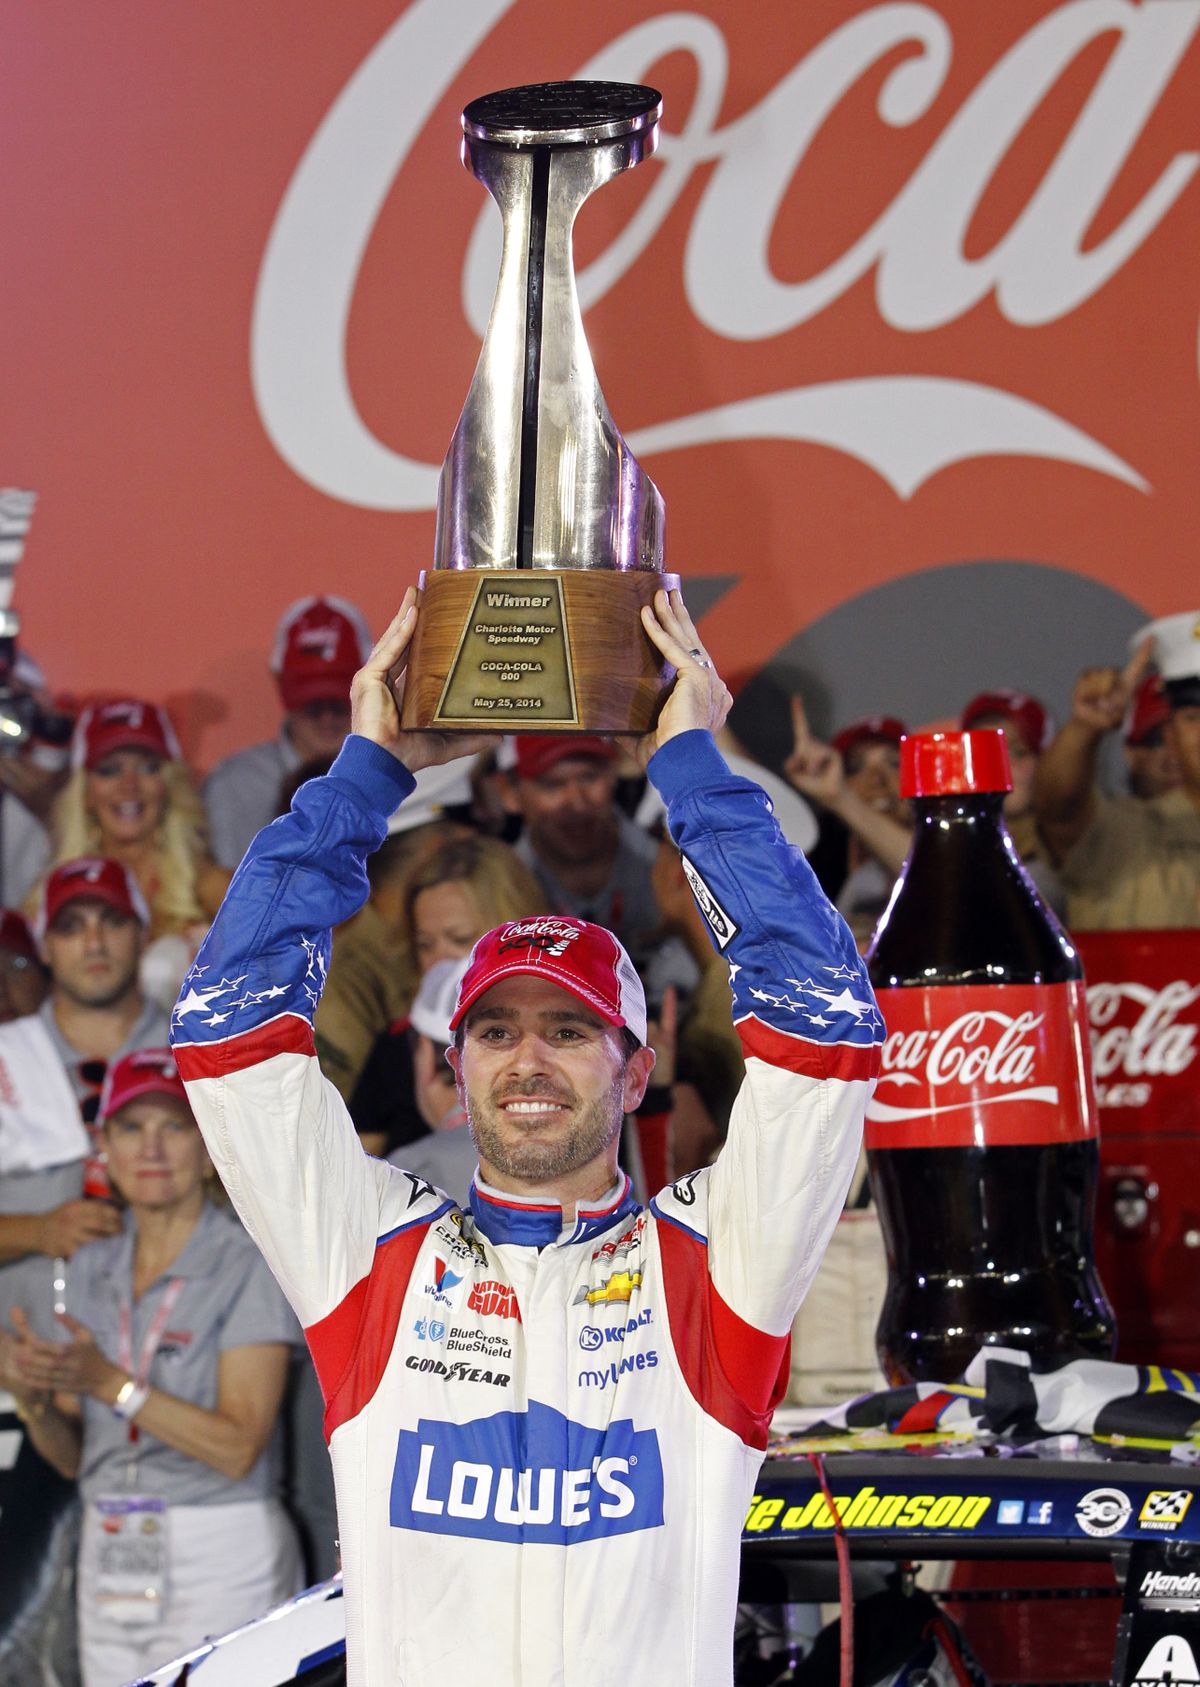 Jimmie Johnson raises the trophy in Victory Lane after winning at Charlotte. (Associated Press)